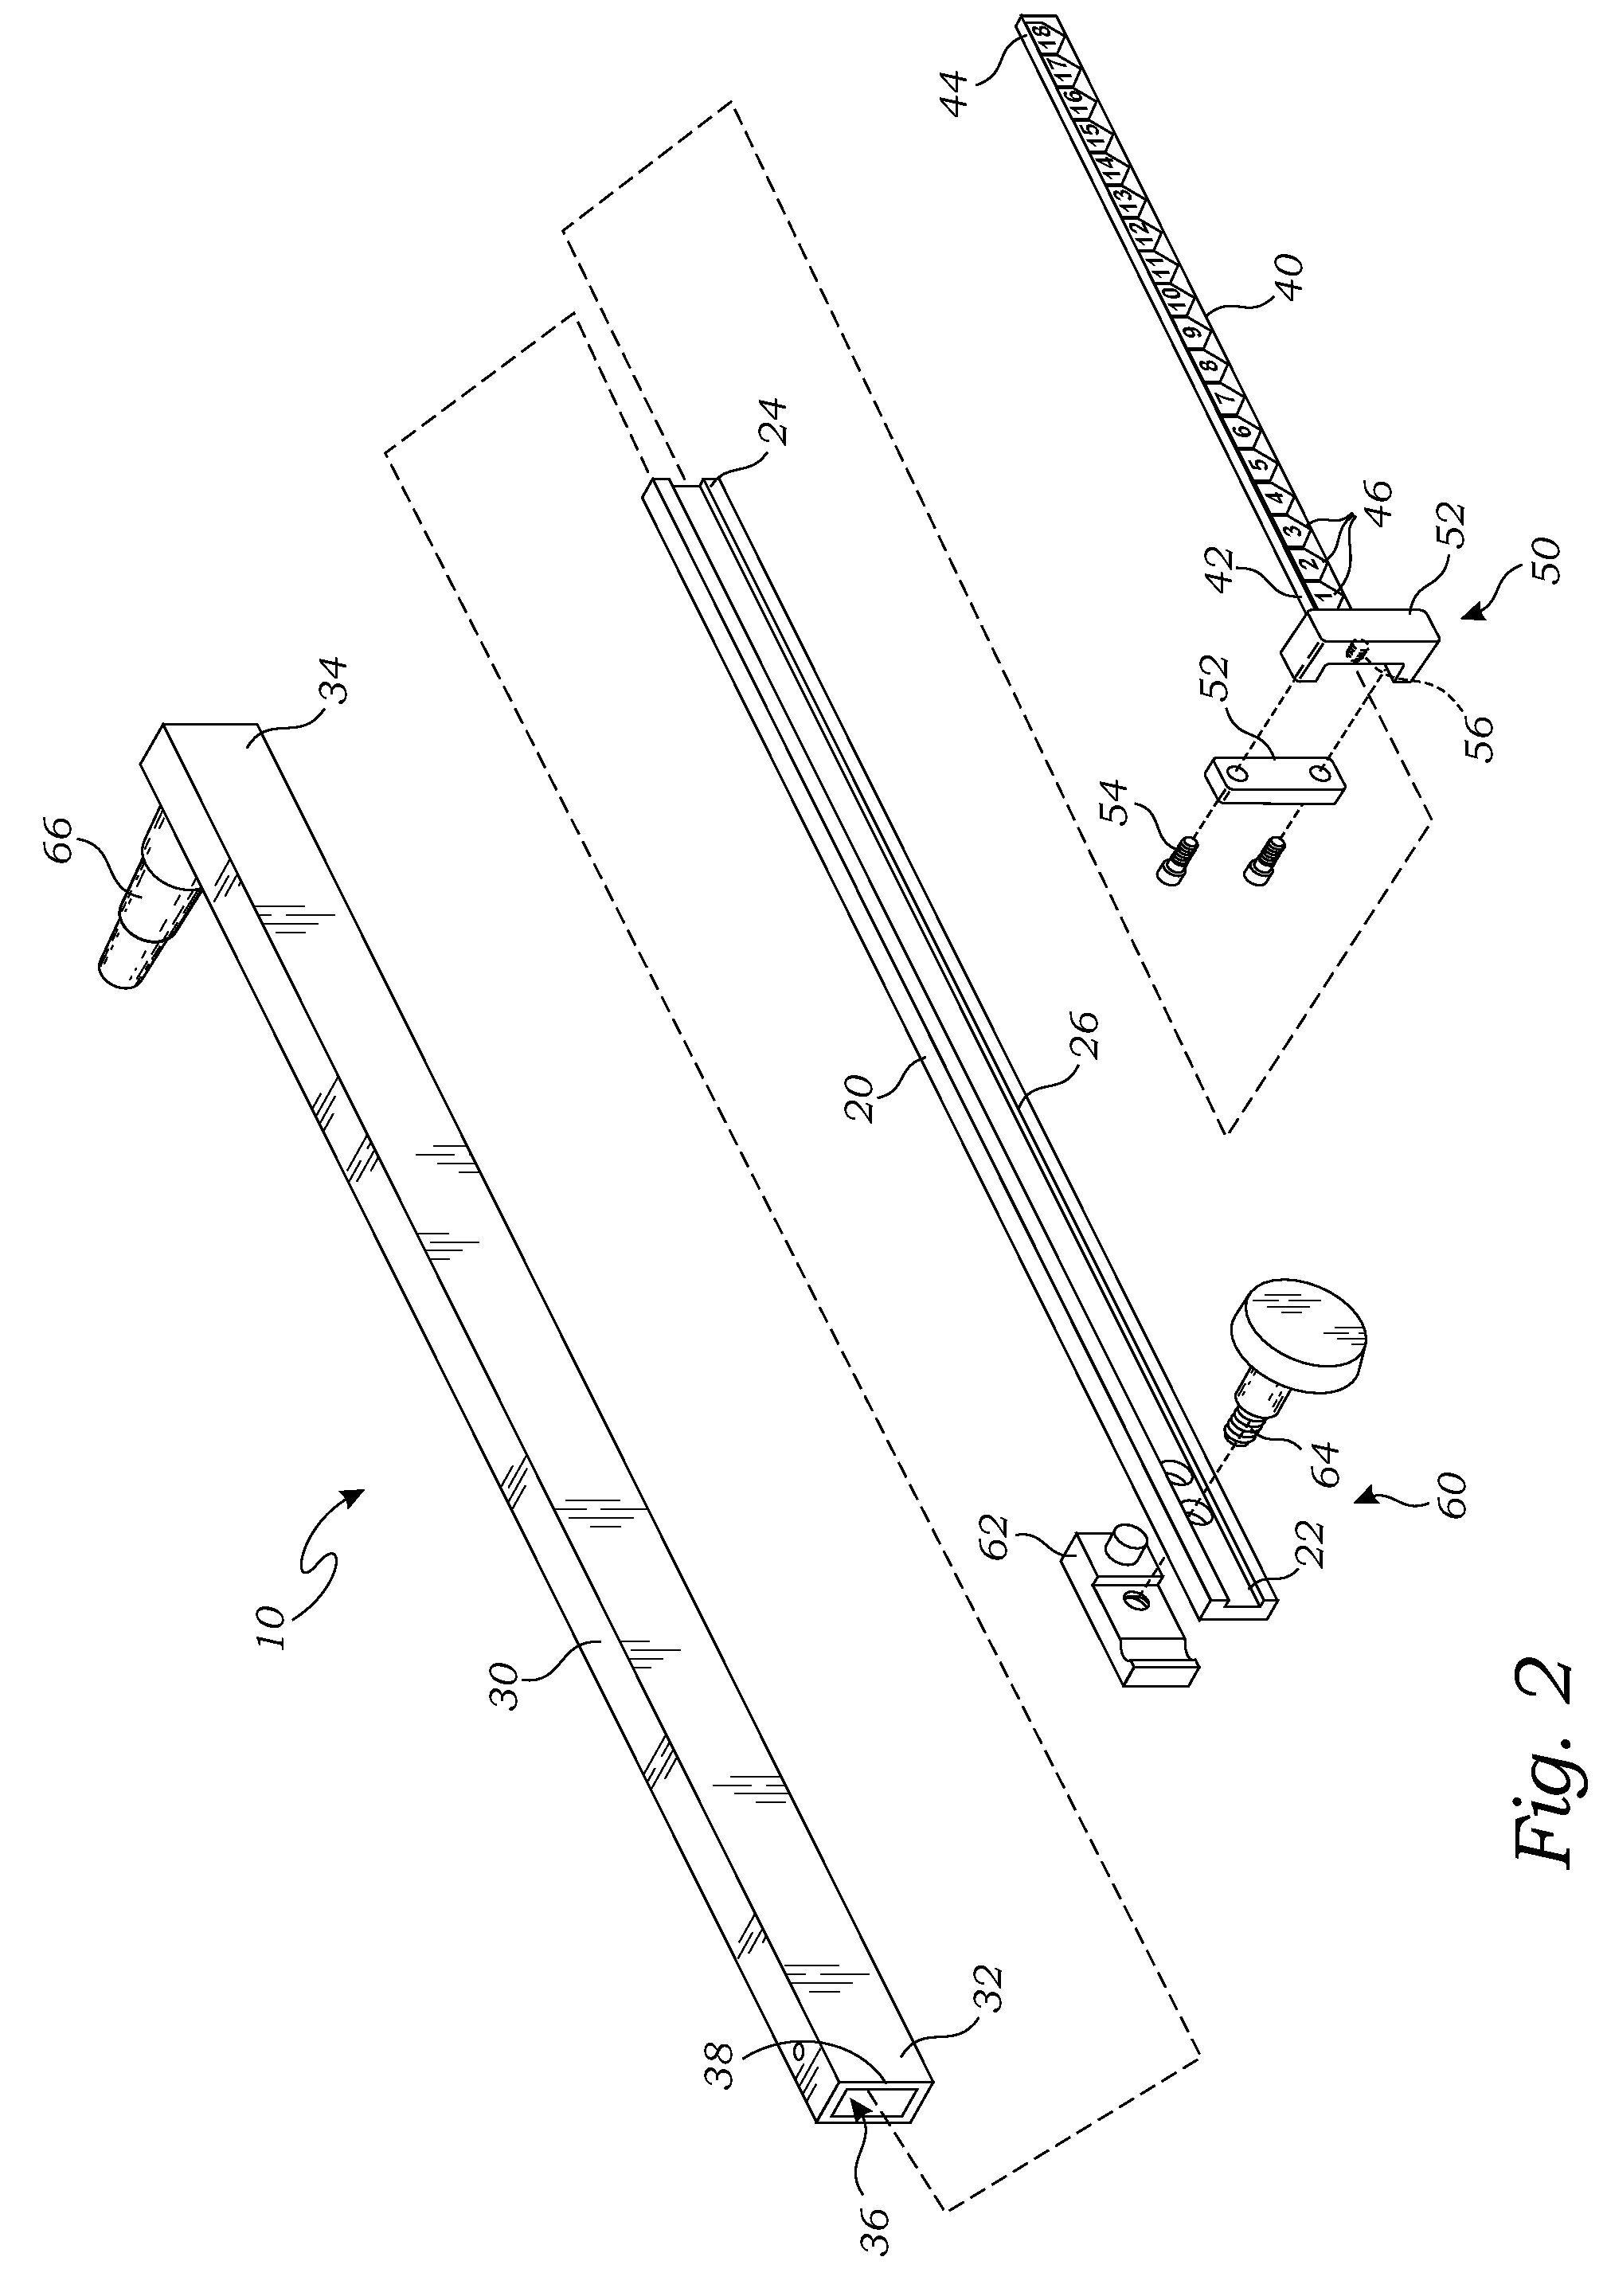 Measuring device and method for measuring suspension sag of a vehicle